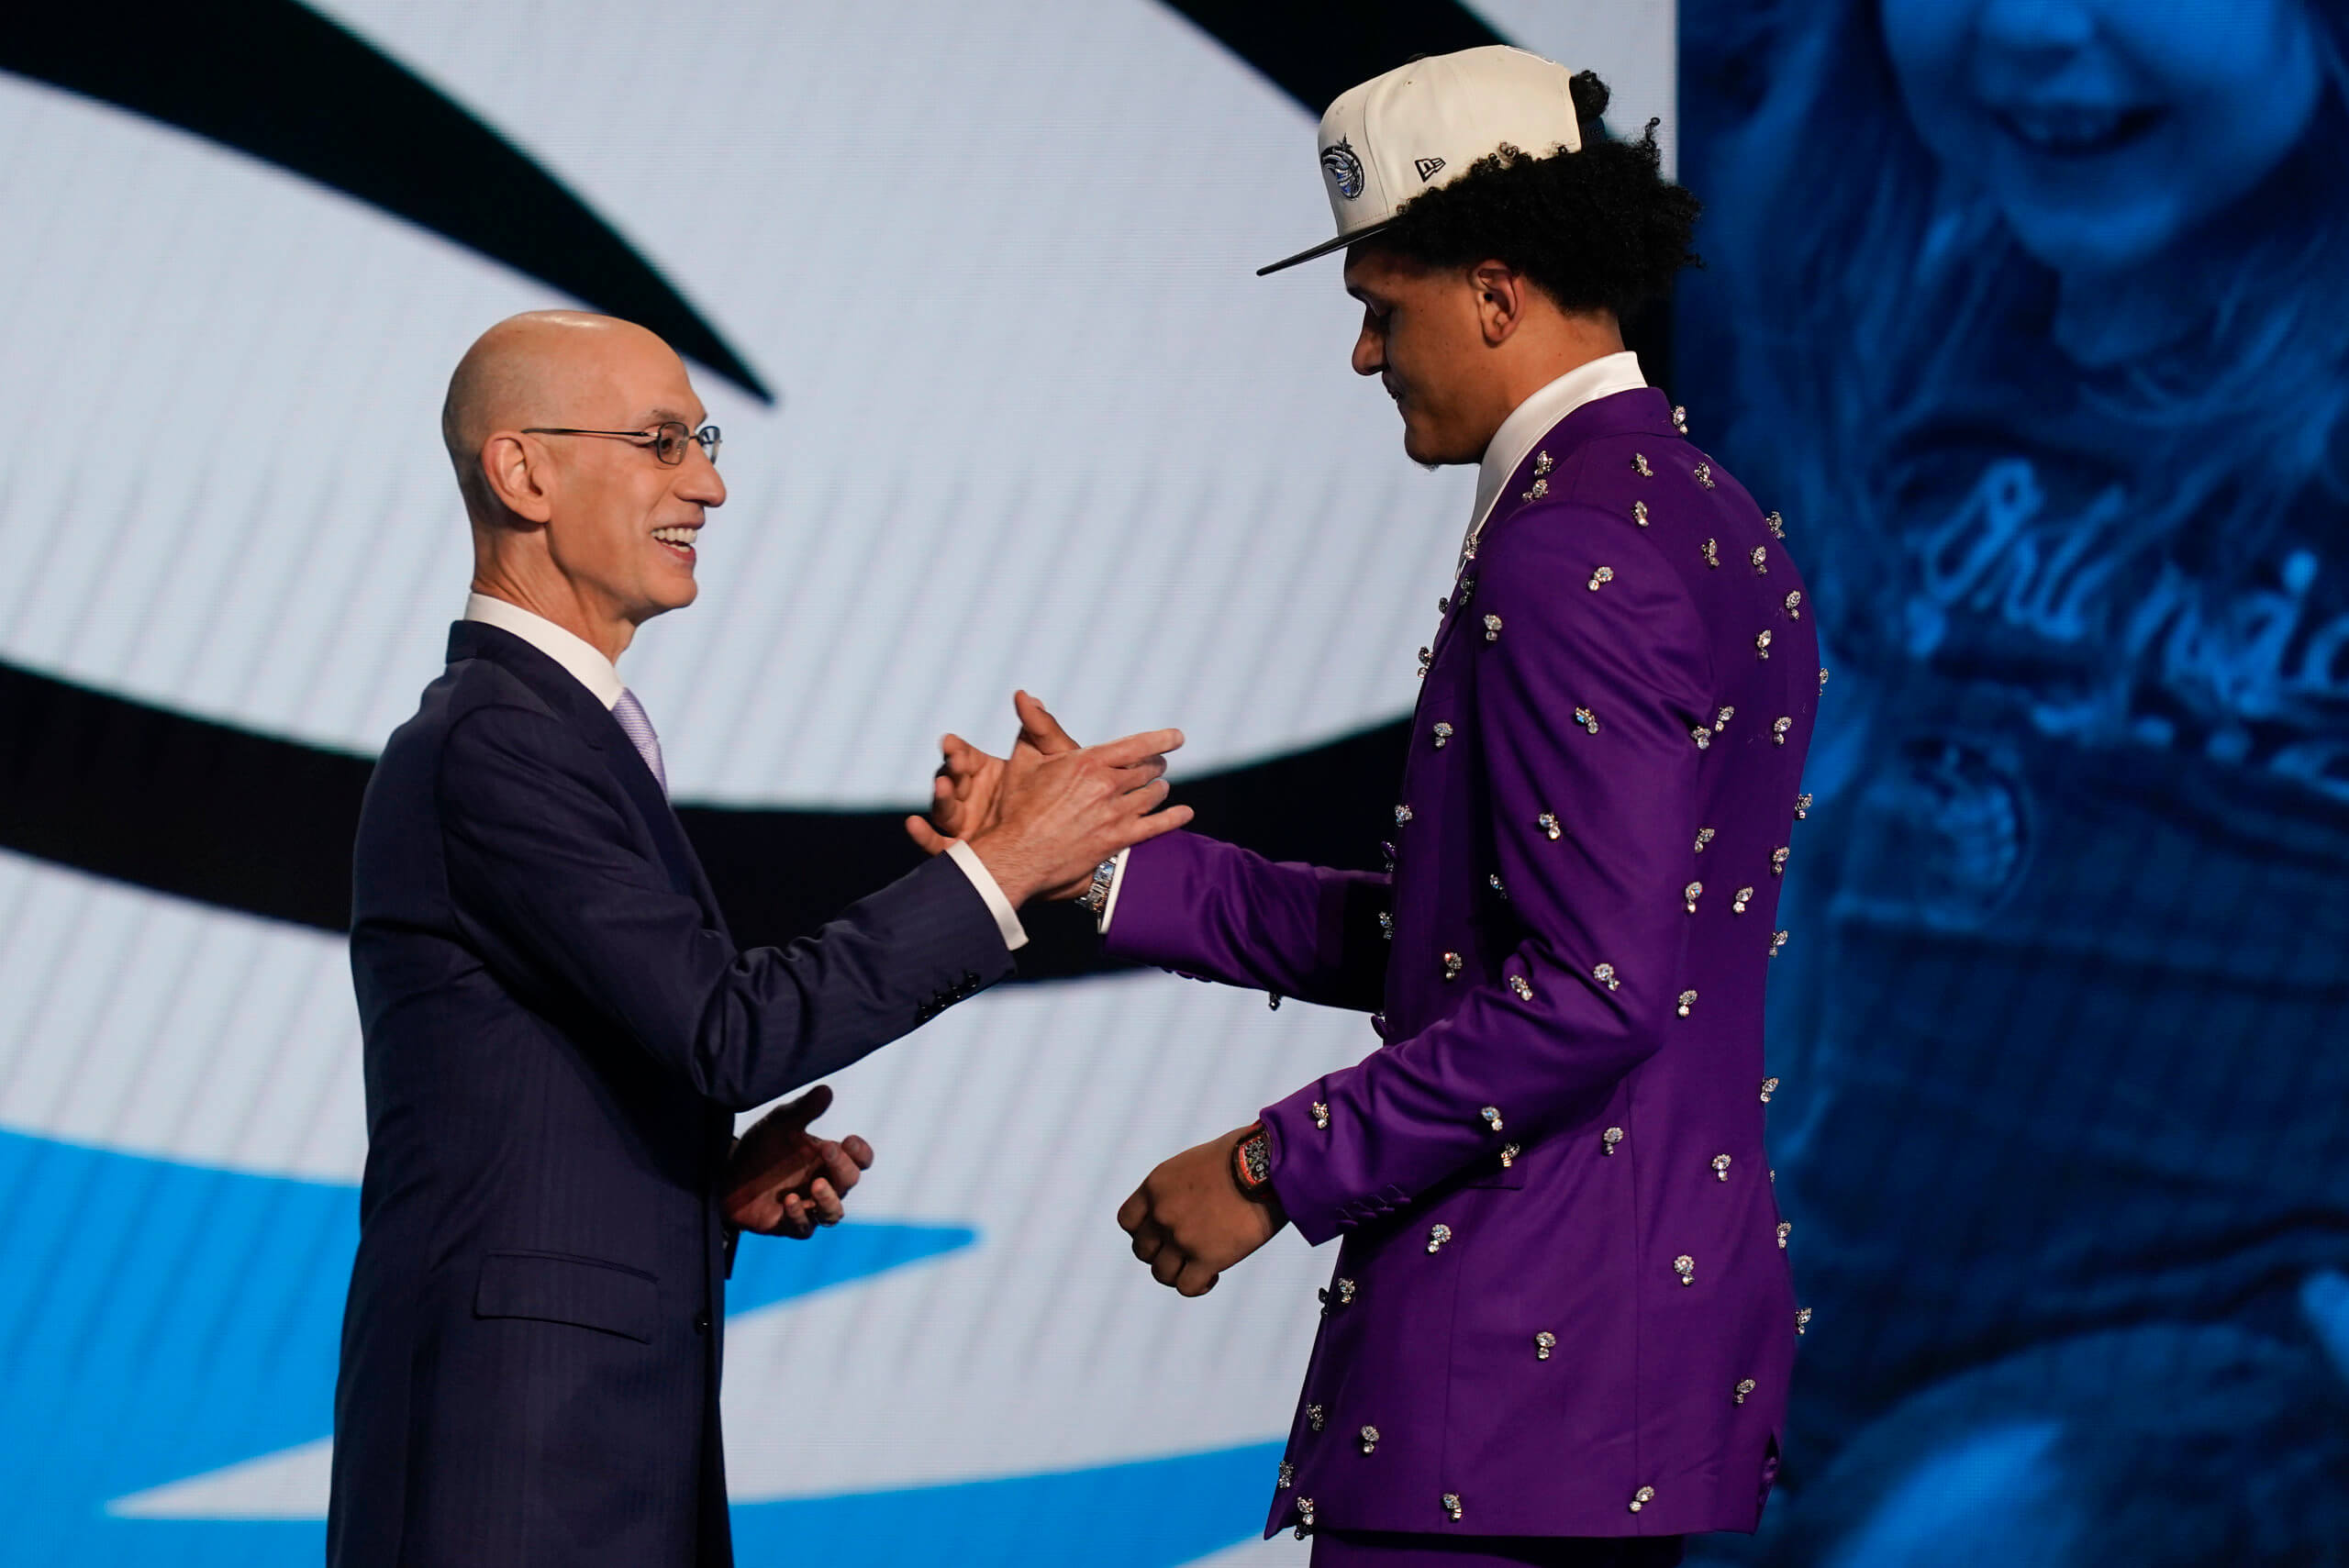 Despite alleged support, the 2022 NBA Draft had no HBCU players, continuing  a decade long trend